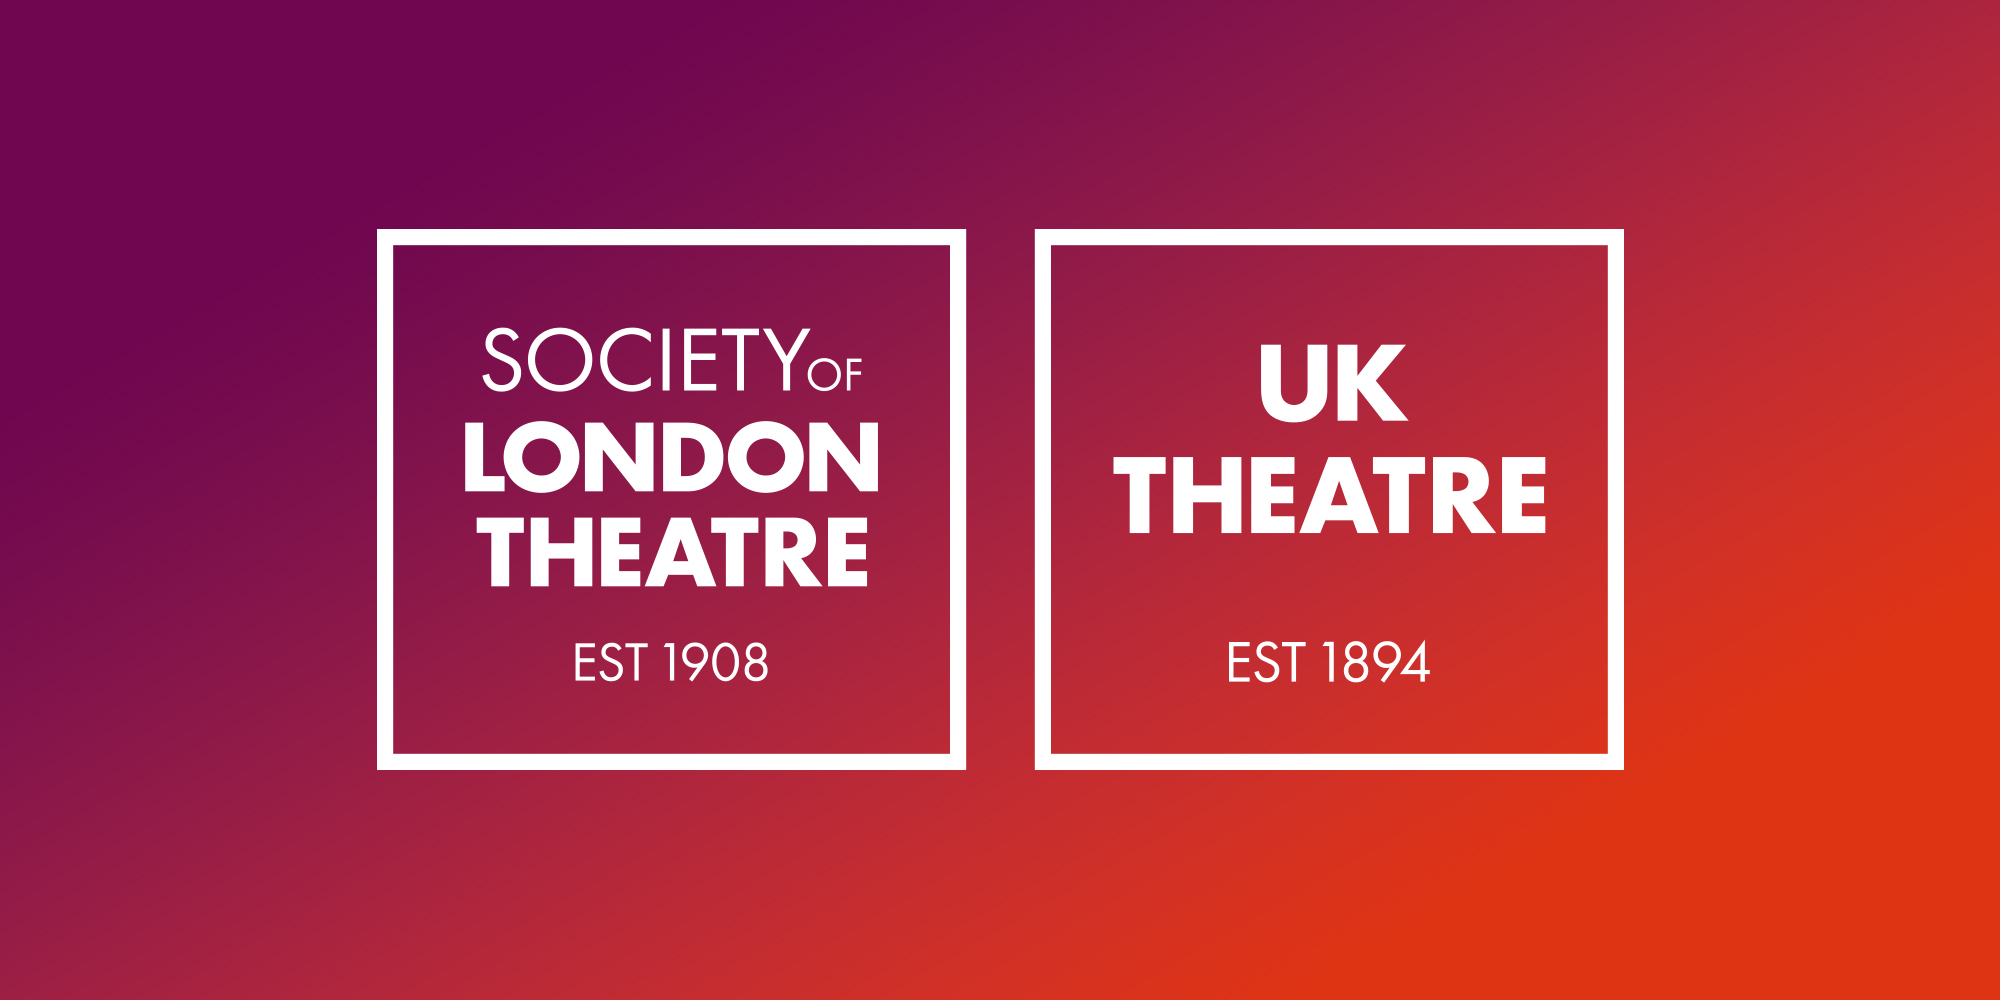 London MP welcomes new TTR rates, citing SOLT & UK Theatre research on the economic impact of theatre